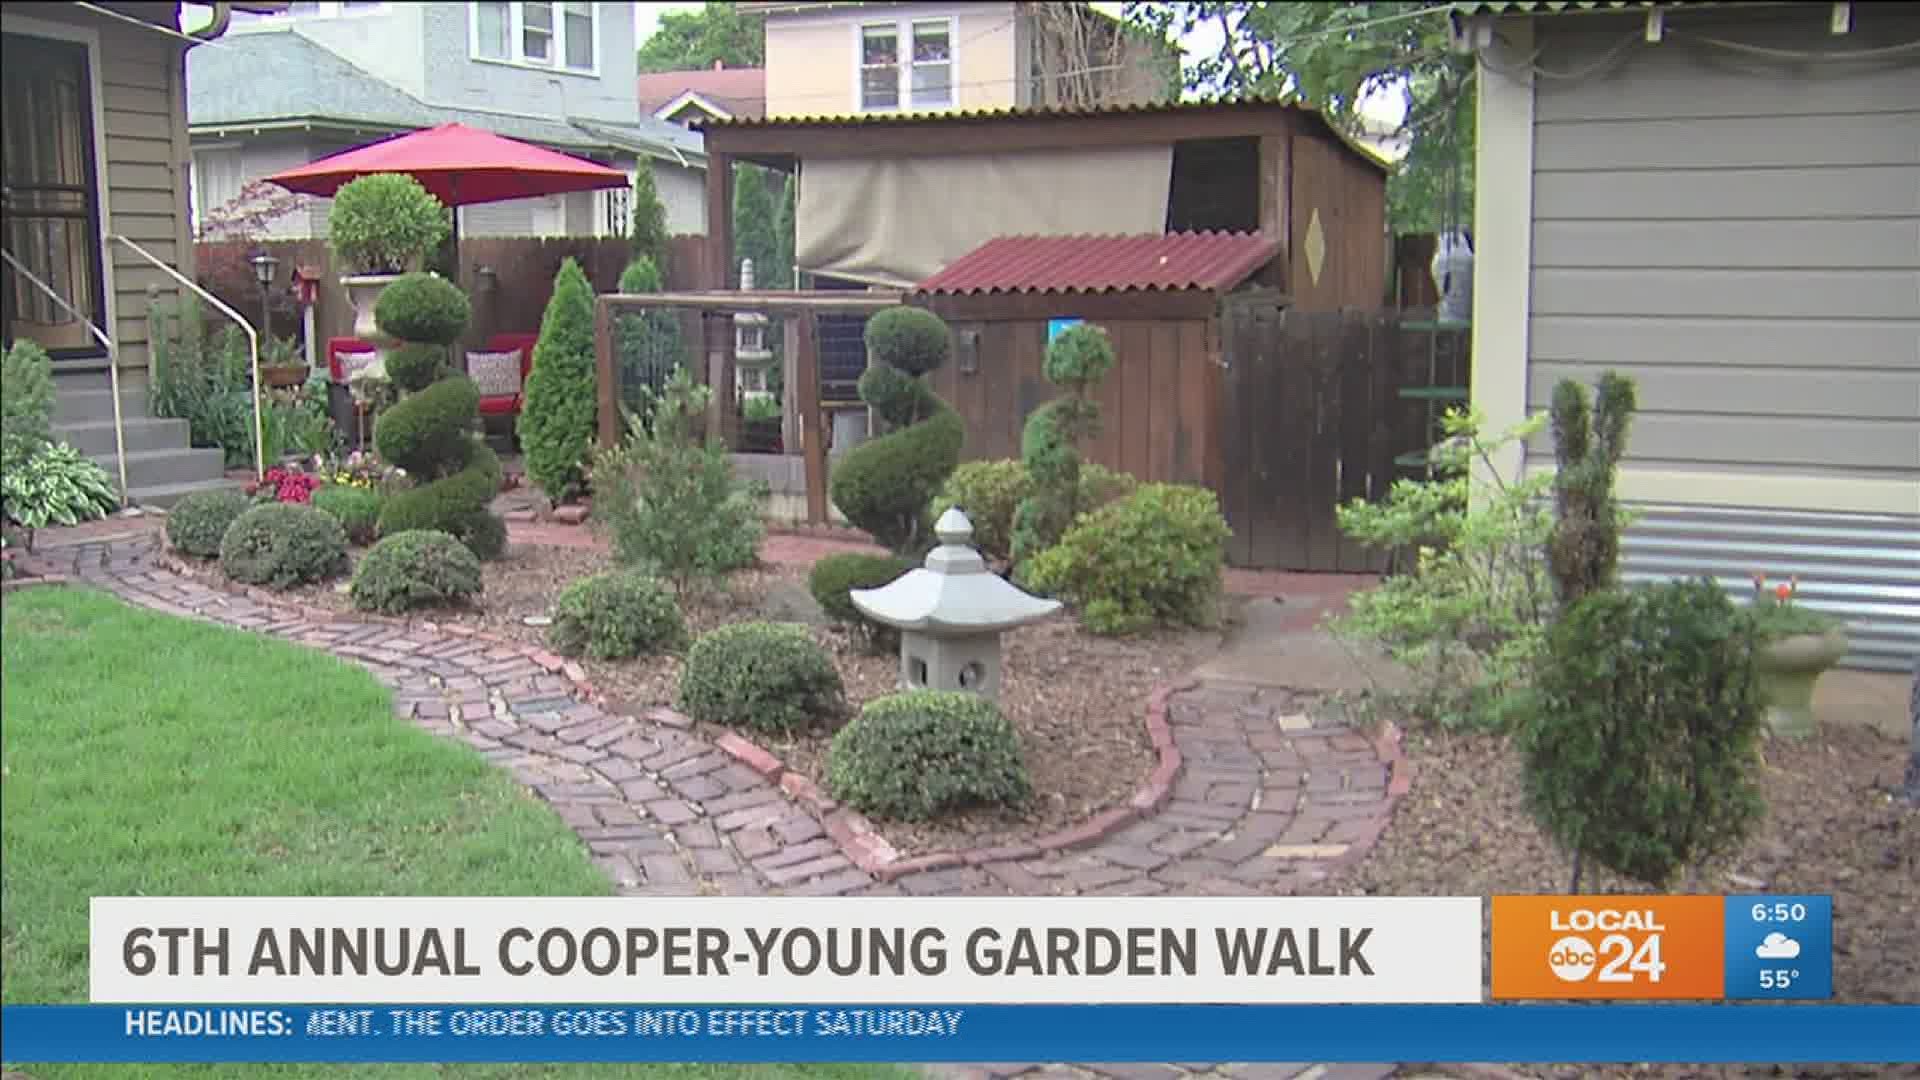 The Cooper-Young Garden Walk is returning for its 6th year this Saturday and Sunday